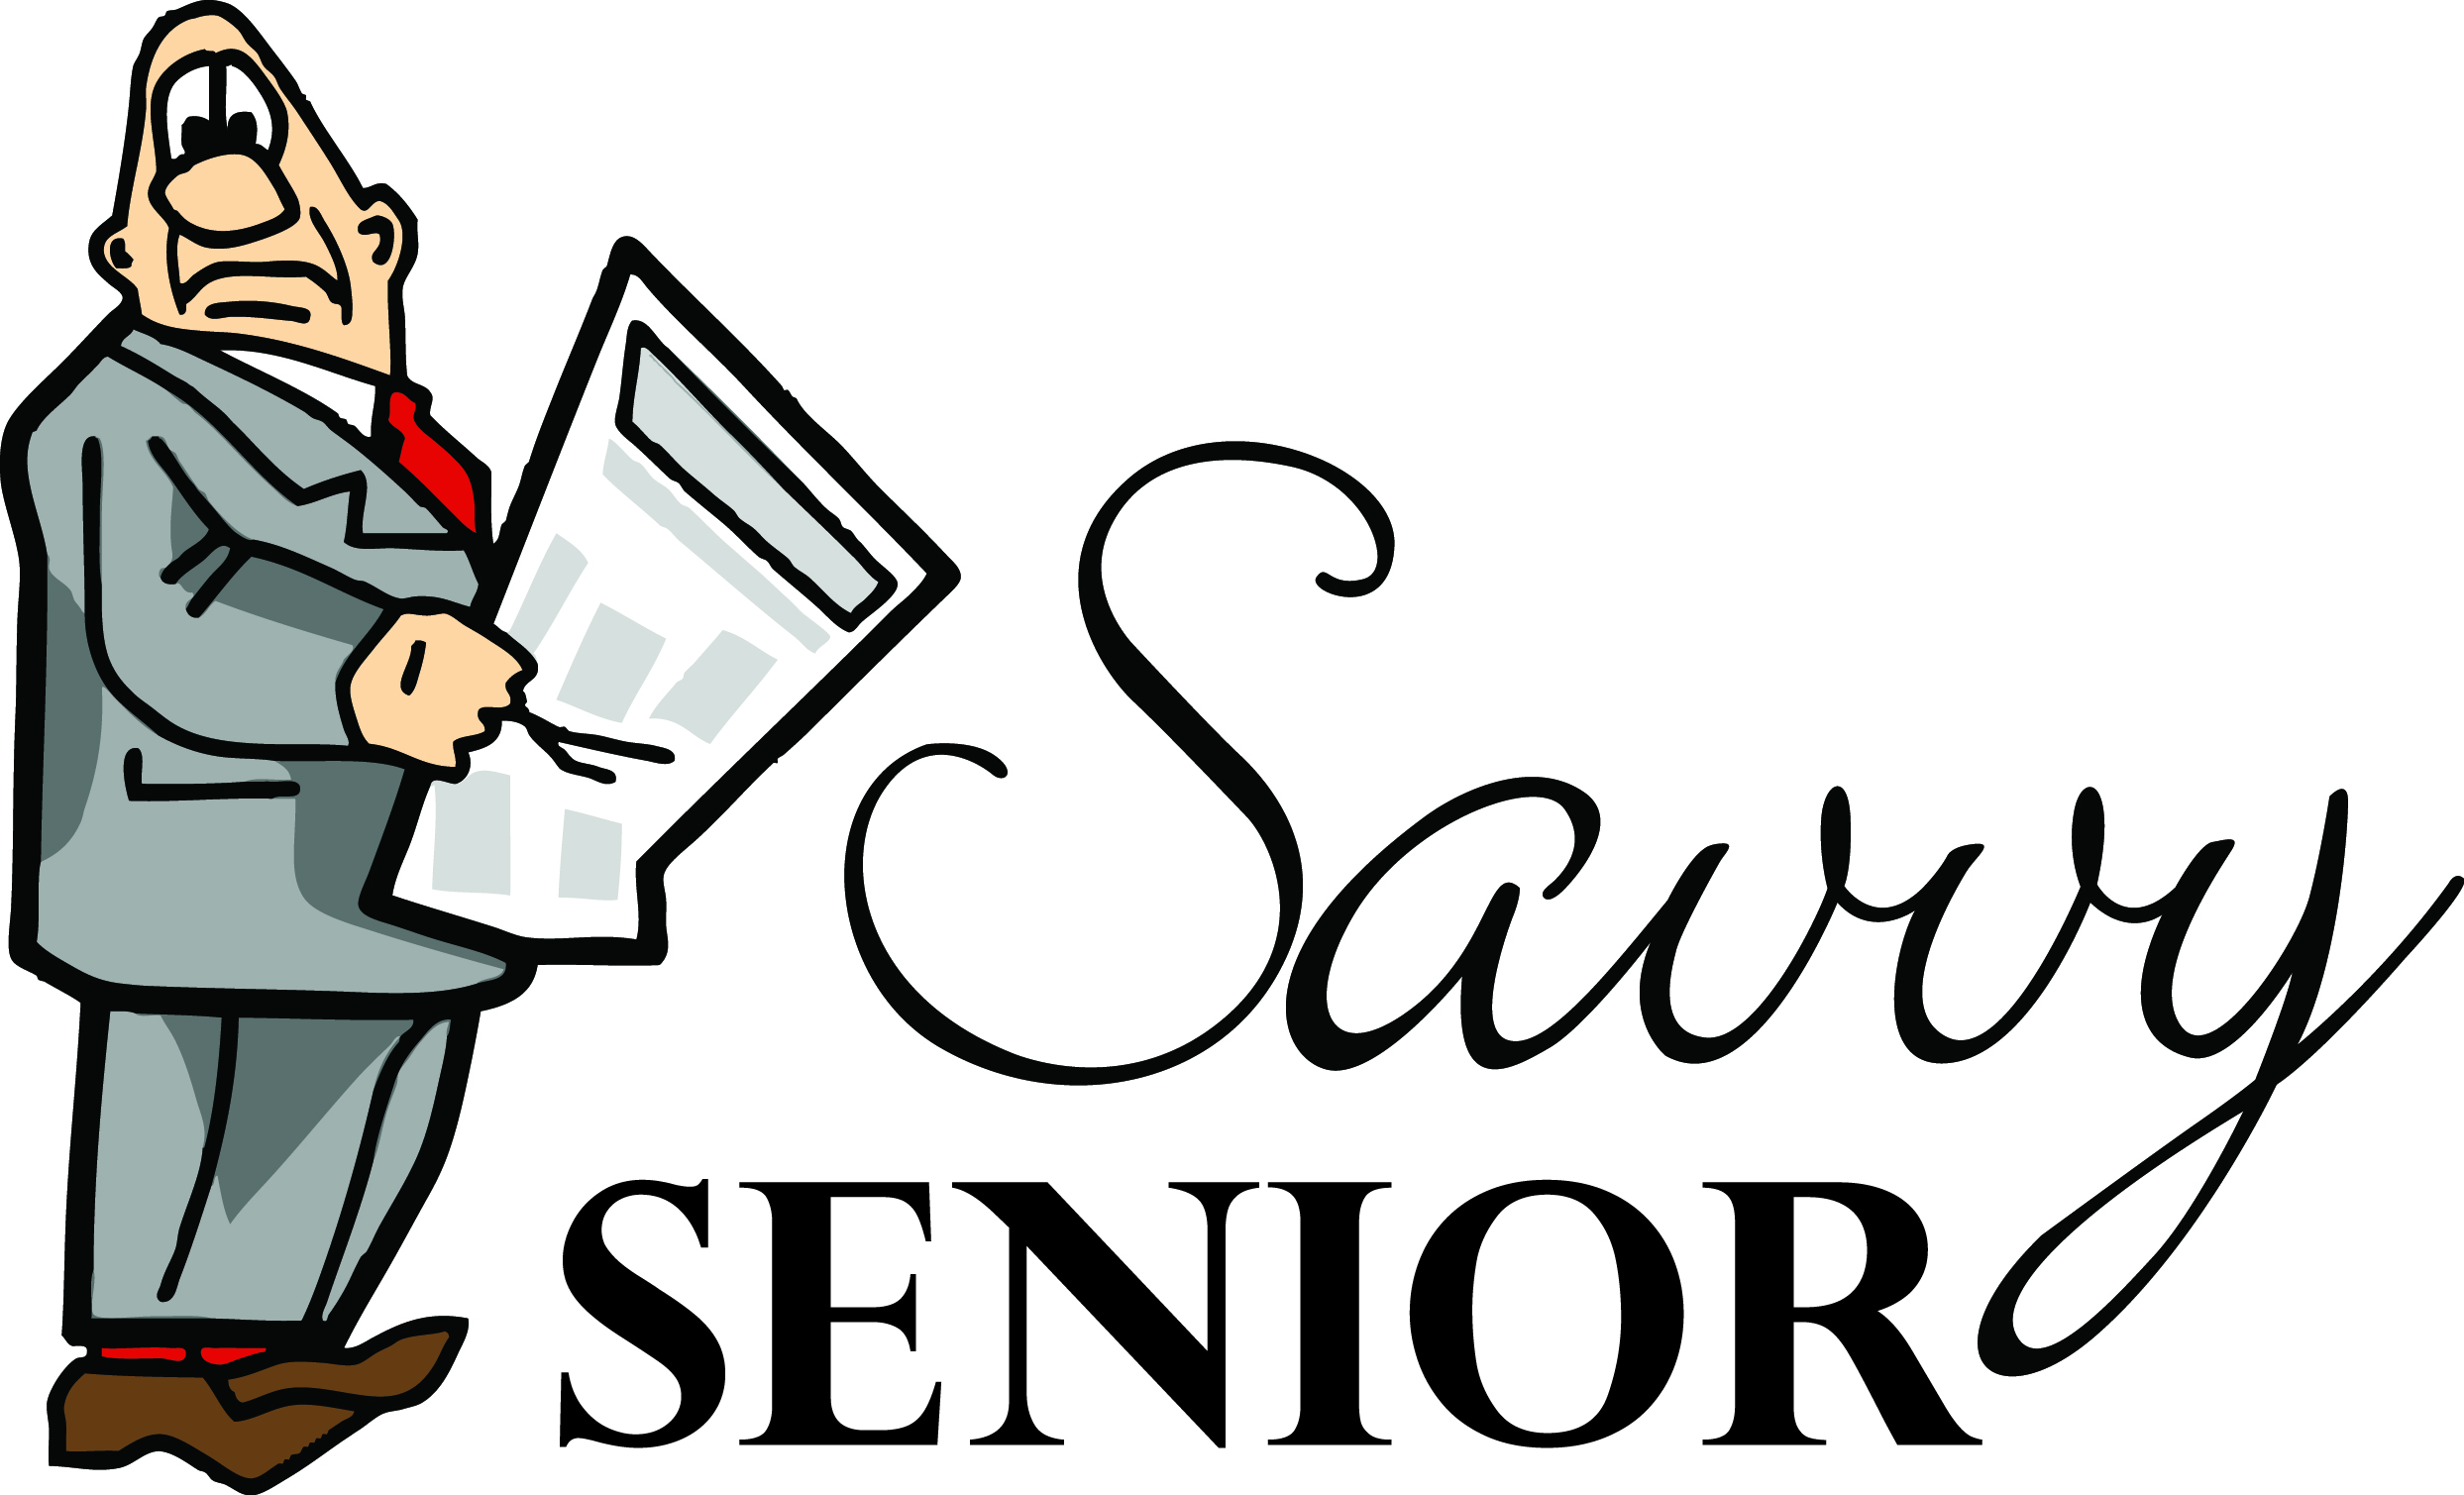 Savvy Senior: Daily money managers can help seniors with financial chores